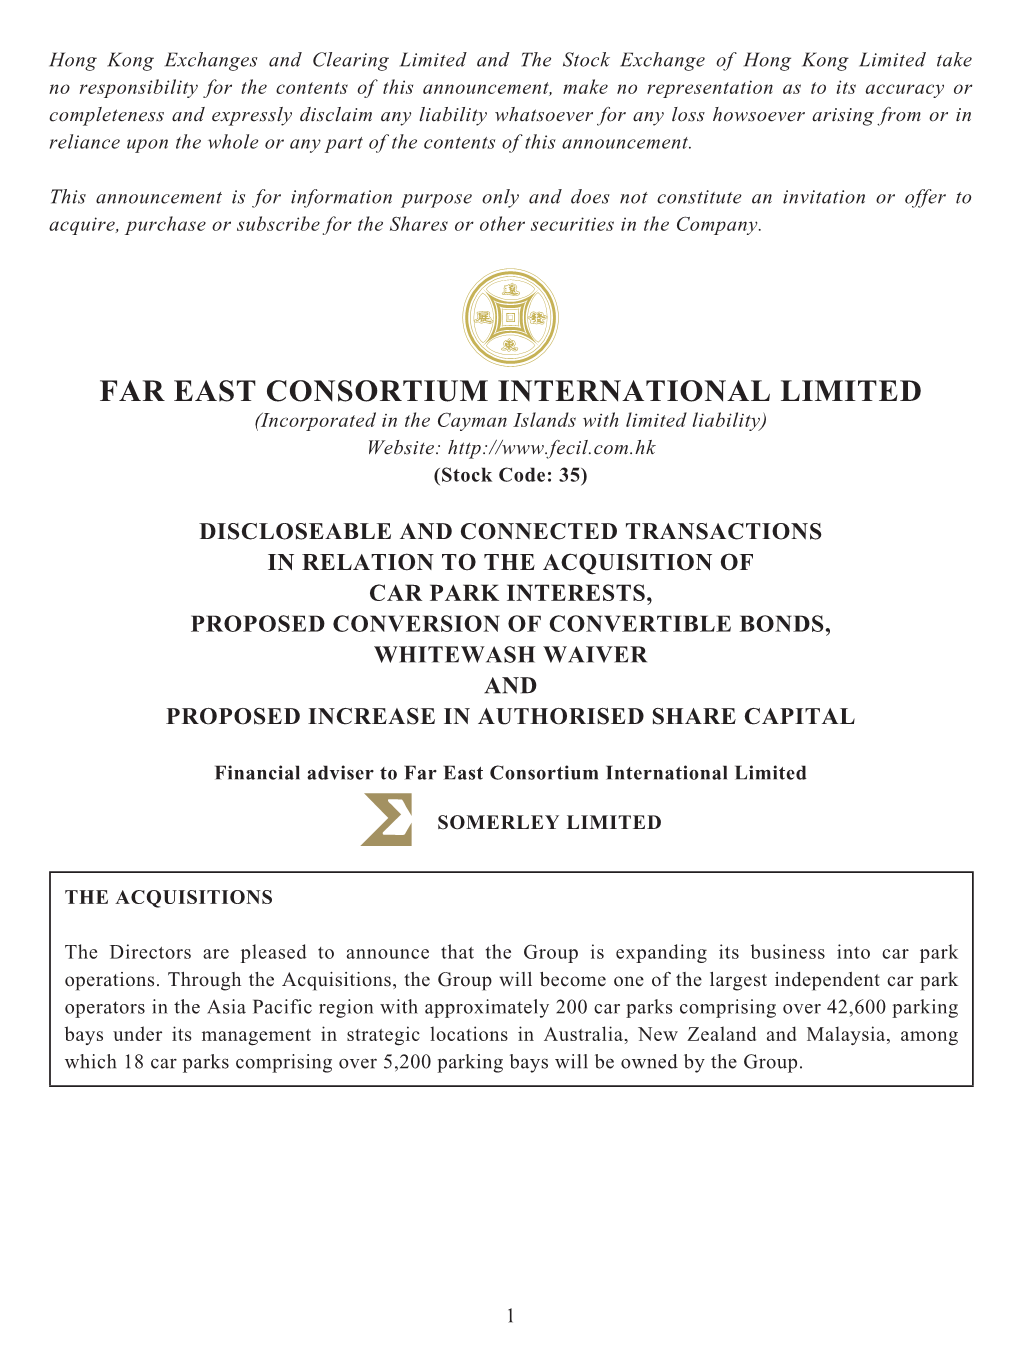 FAR EAST CONSORTIUM INTERNATIONAL LIMITED (Incorporated in the Cayman Islands with Limited Liability) Website: (Stock Code: 35)